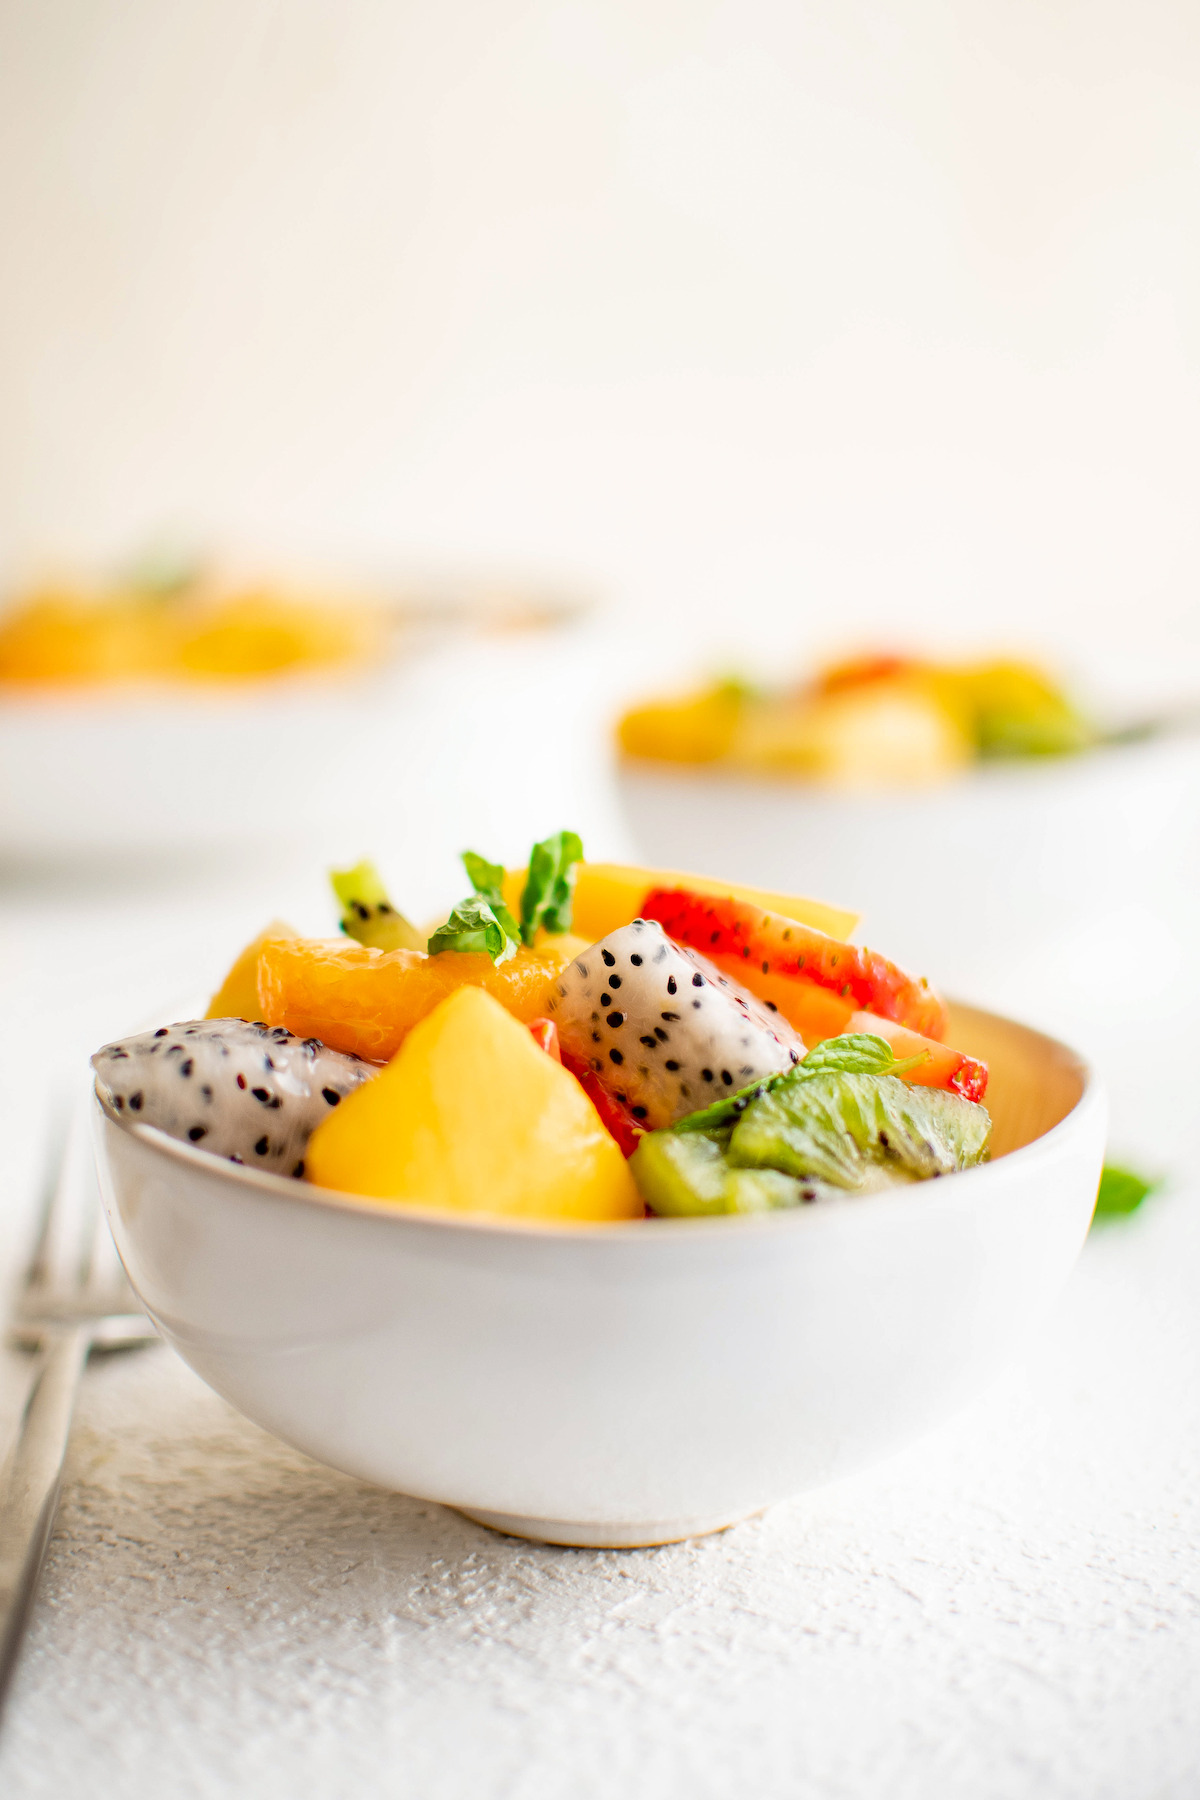 Tropical fruit salad in a small white bowl.